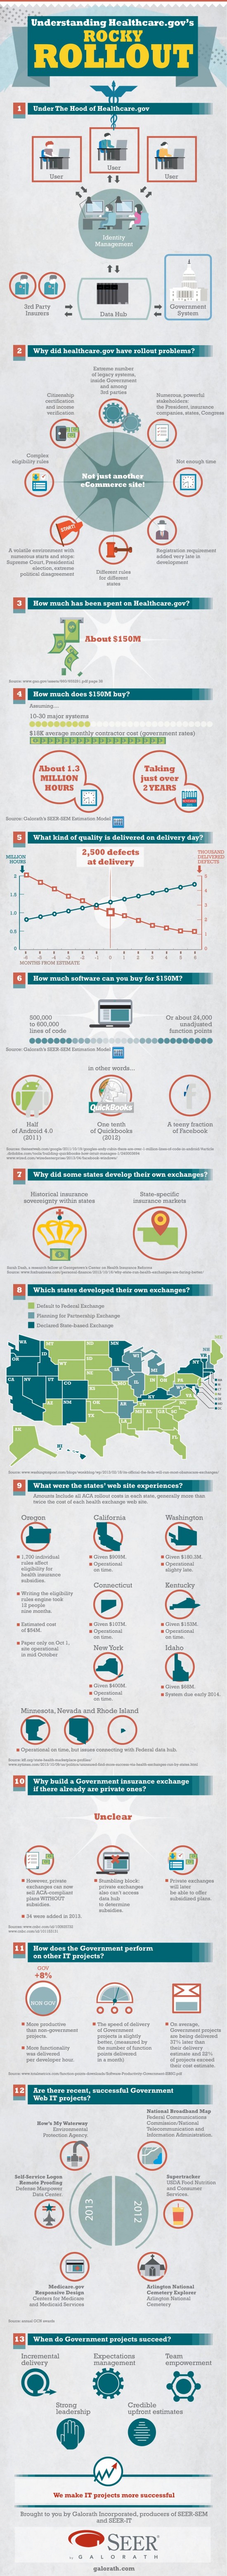 Understanding Healthcare.gov’s Rocky Rollout infographic